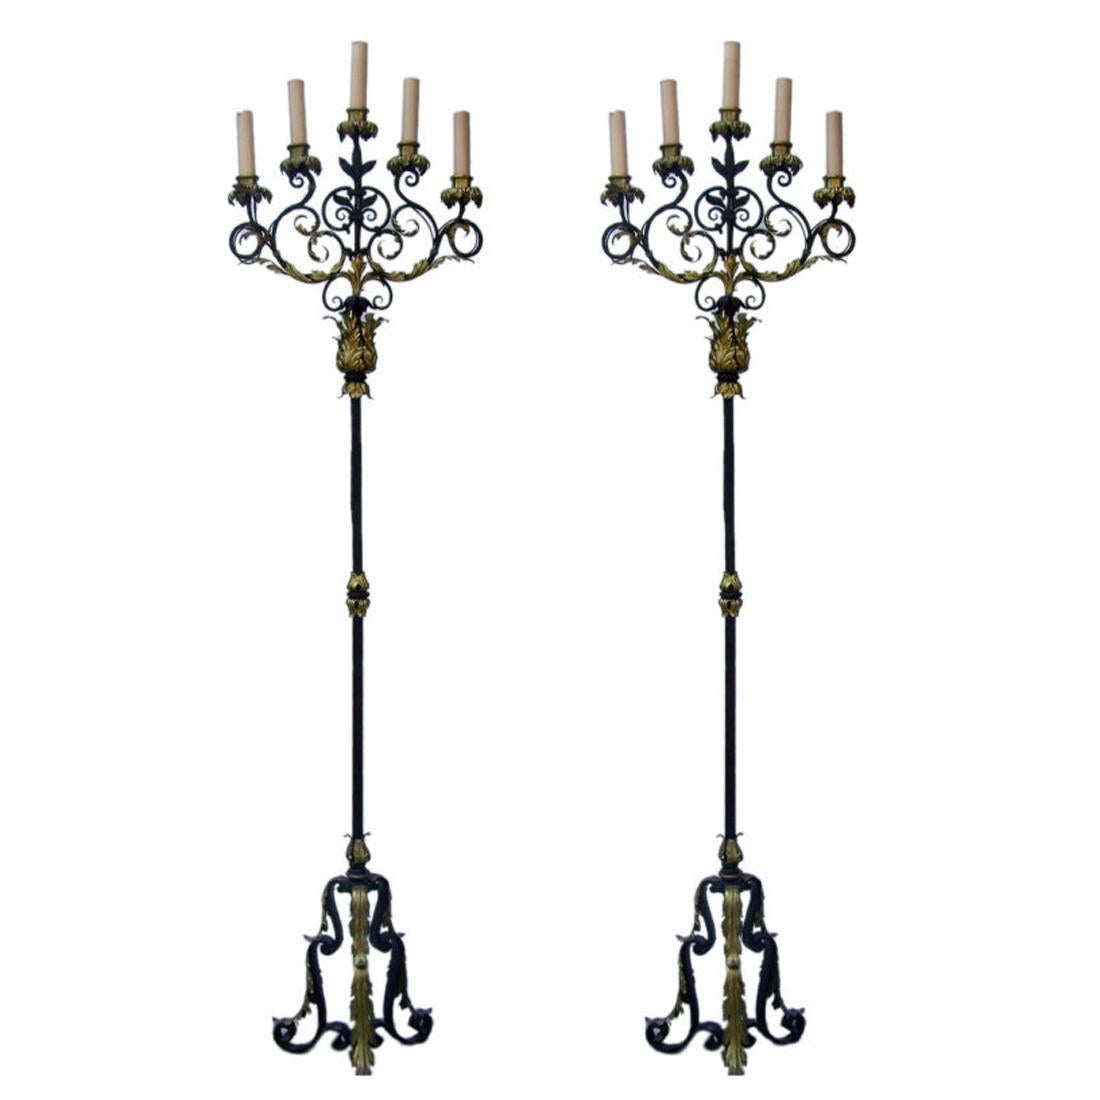 Mid 19th C Pair of Hand-Wrought Iron Torchieres